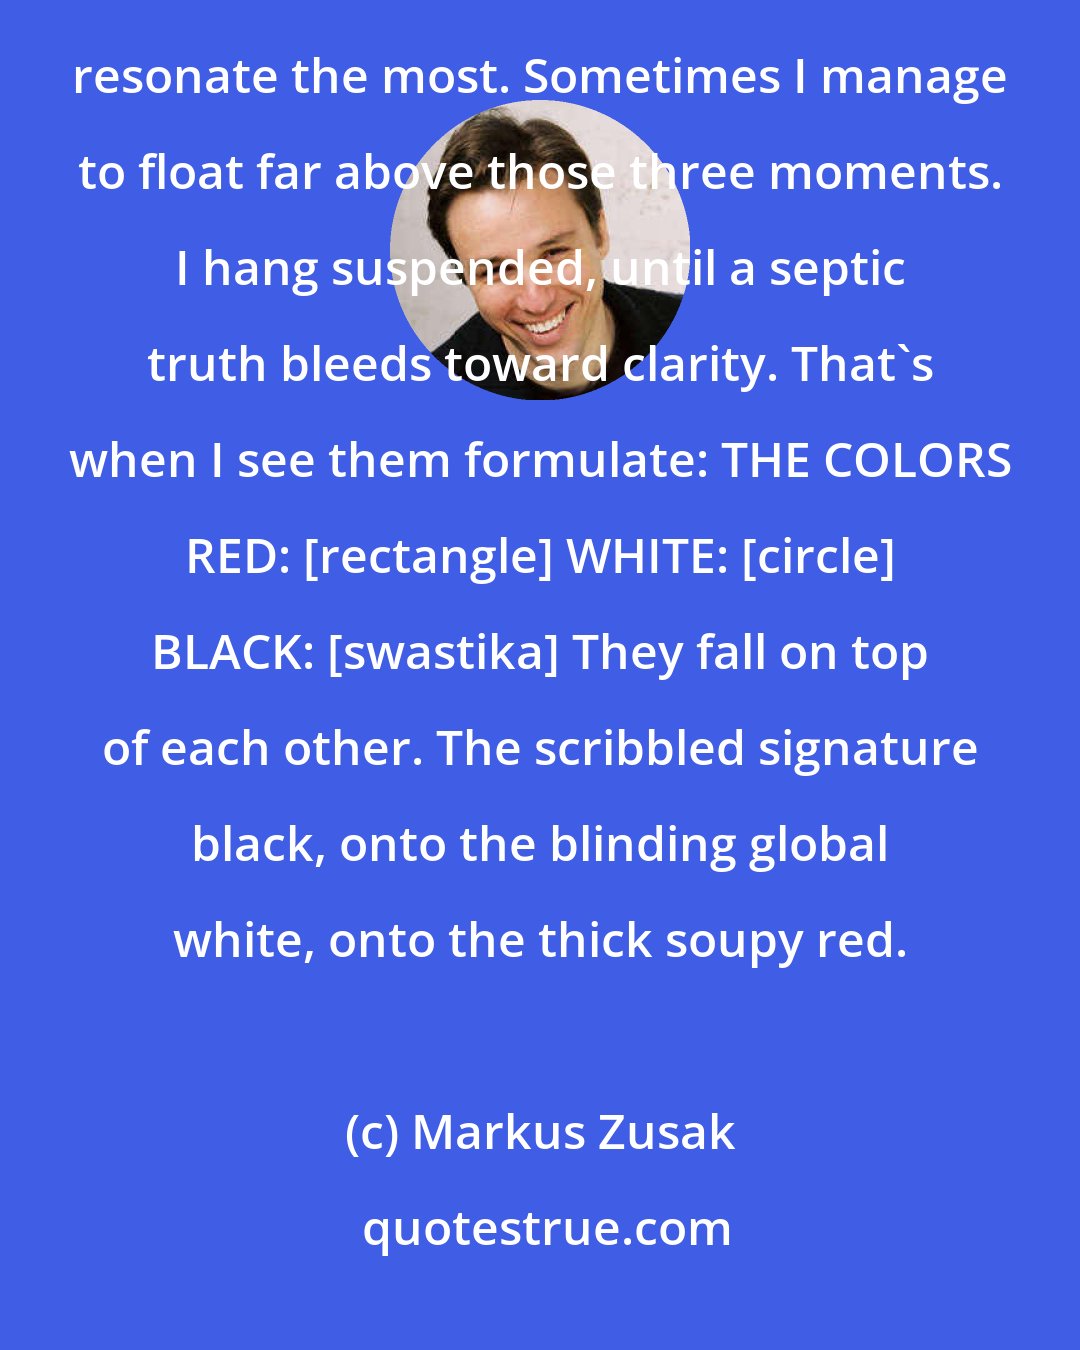 Markus Zusak: When I recollect her, I see a long list of colors, but it's the three in which I saw her in the flesh that resonate the most. Sometimes I manage to float far above those three moments. I hang suspended, until a septic truth bleeds toward clarity. That's when I see them formulate: THE COLORS RED: [rectangle] WHITE: [circle] BLACK: [swastika] They fall on top of each other. The scribbled signature black, onto the blinding global white, onto the thick soupy red.